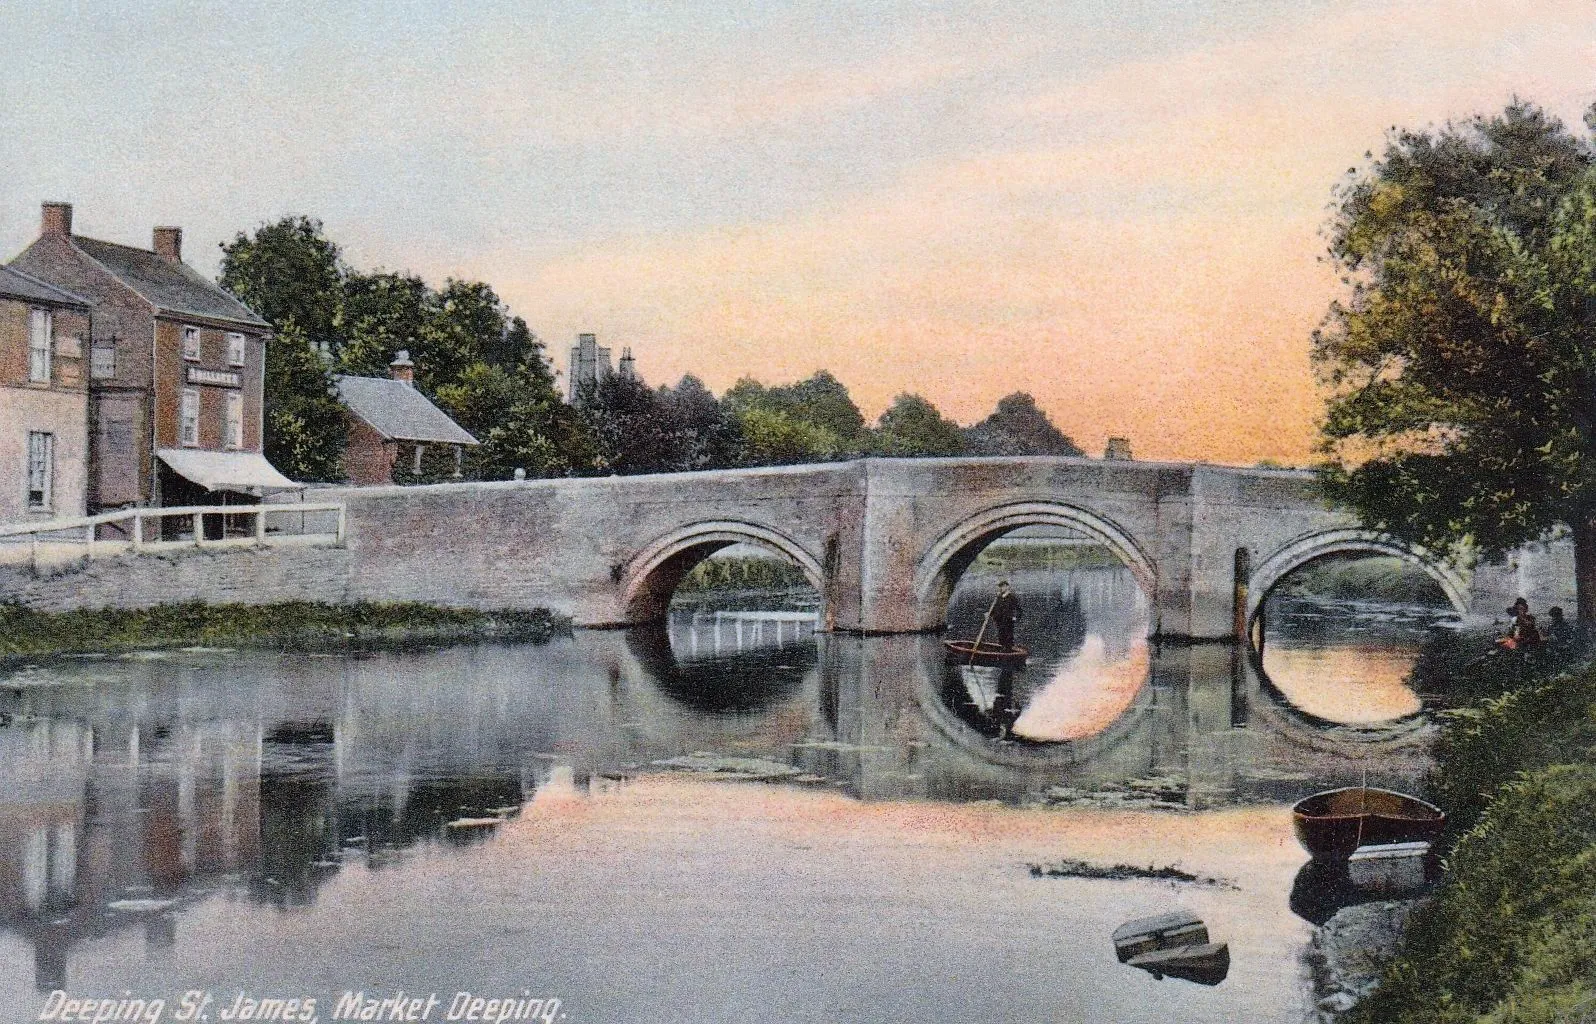 Photo showing: Brige over the River Welland at Deeping St James - tinted postcard 1907 or earlier.

The photograph was taken on the south bank of the river below what is now the Riverside public footpath, and centres on the 1651 Deeping Gate Bridge, now Grade II* listed. The view looks east, with the now B1166 road (Bridge St.) from Stamford at the left, and Crowland towards the centre. The houses opposite exist, with the part of the building to the left of that with the awning being The Bell public house.